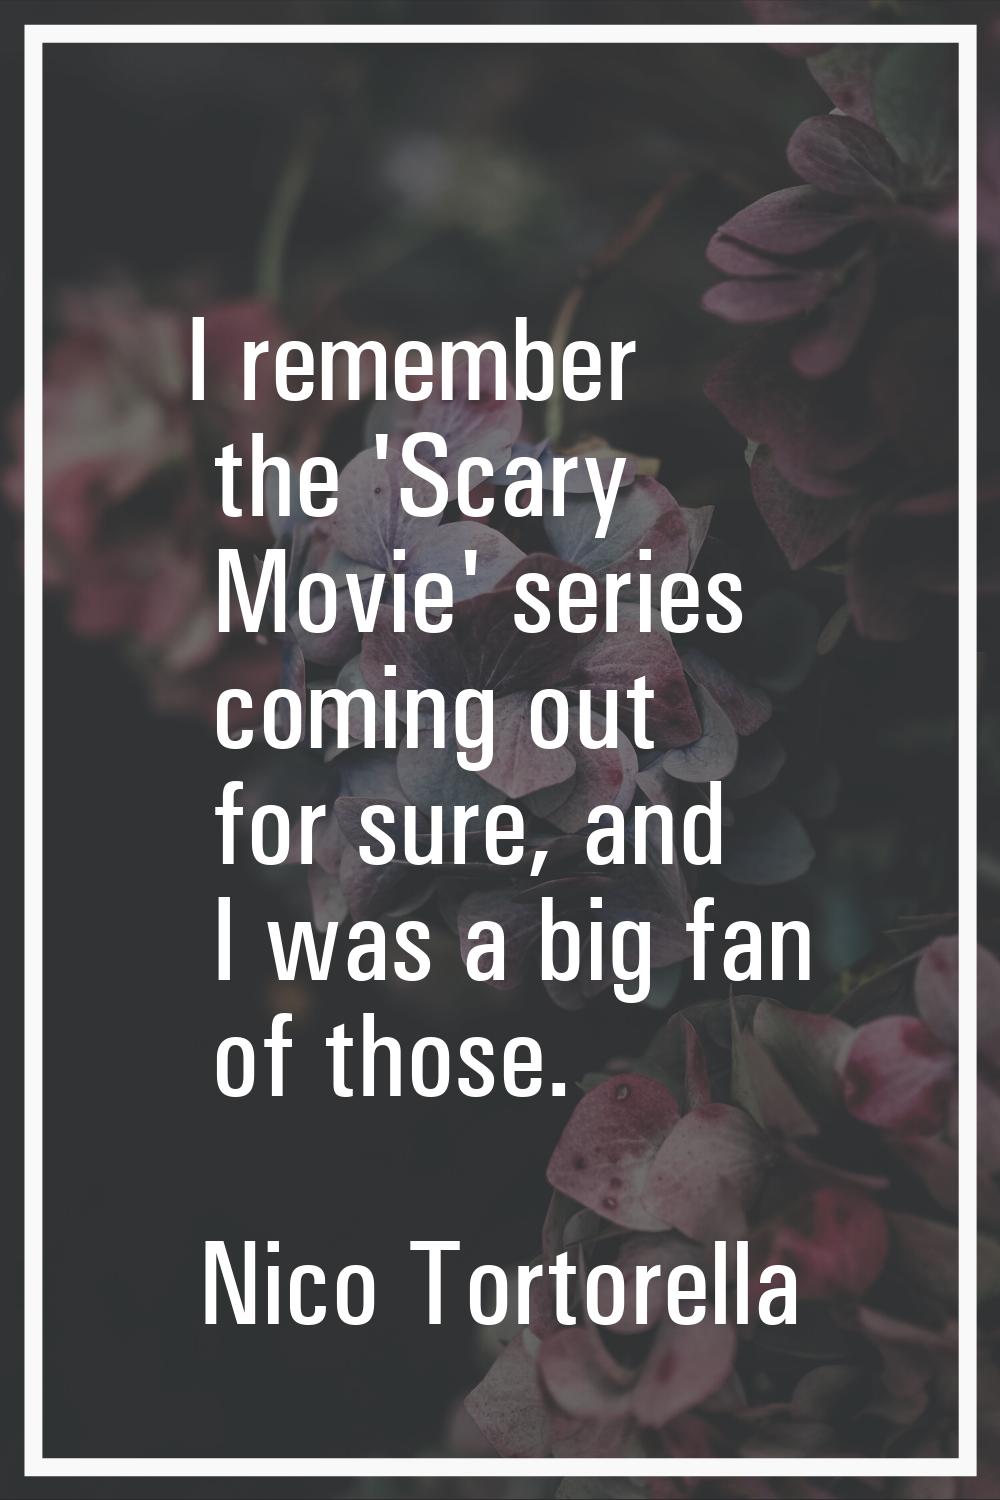 I remember the 'Scary Movie' series coming out for sure, and I was a big fan of those.